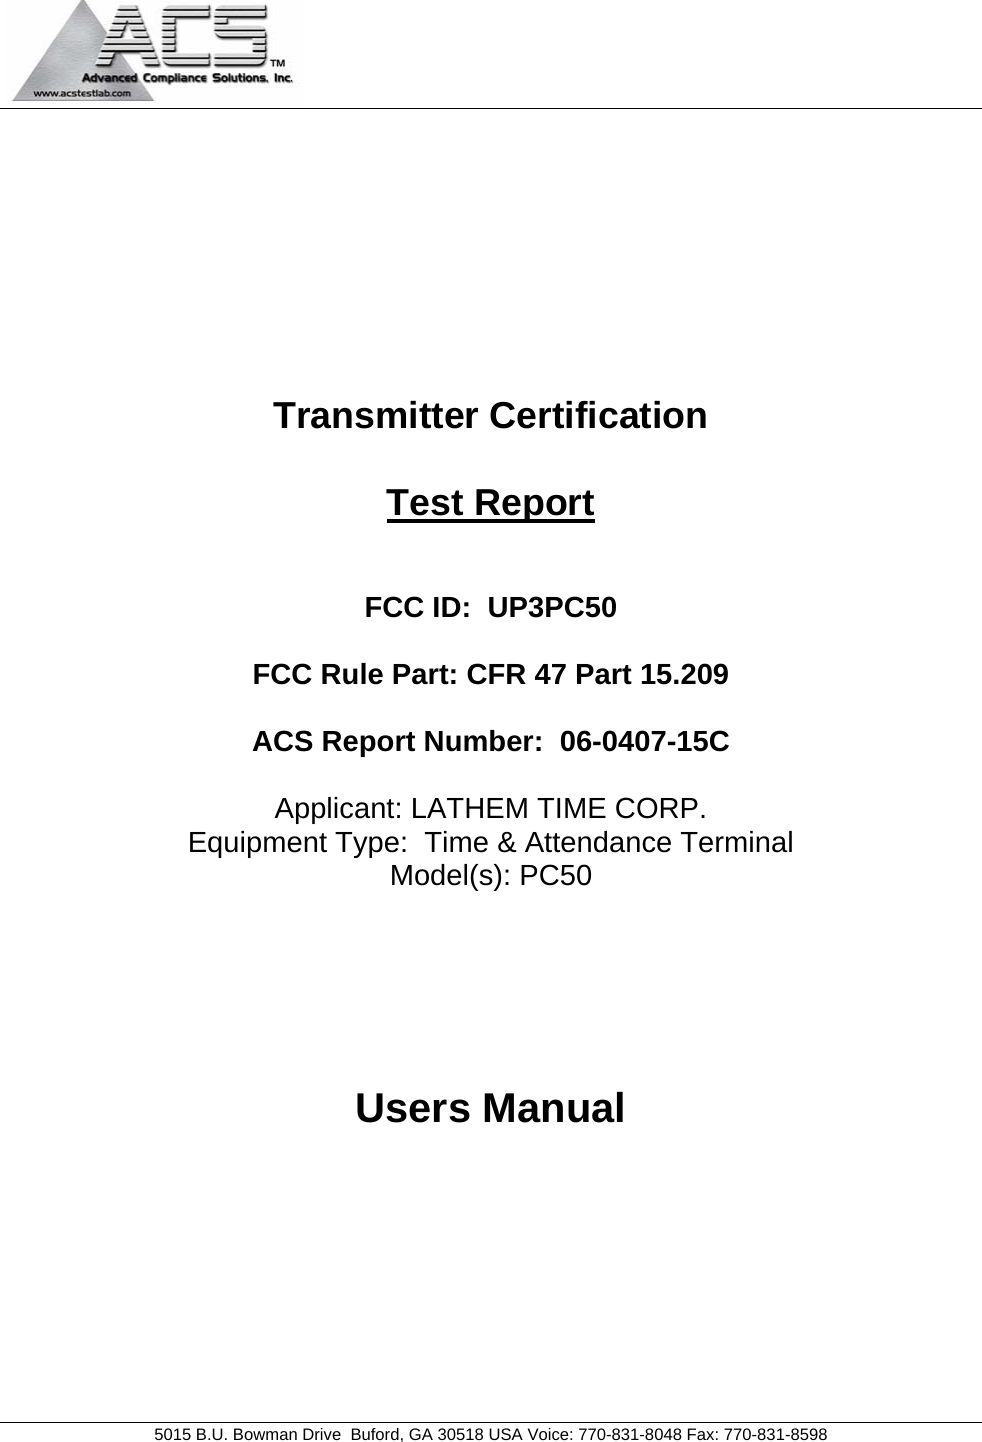                                             5015 B.U. Bowman Drive  Buford, GA 30518 USA Voice: 770-831-8048 Fax: 770-831-8598   Transmitter Certification  Test Report   FCC ID:  UP3PC50  FCC Rule Part: CFR 47 Part 15.209  ACS Report Number:  06-0407-15C   Applicant: LATHEM TIME CORP. Equipment Type:  Time &amp; Attendance Terminal Model(s): PC50     Users Manual  